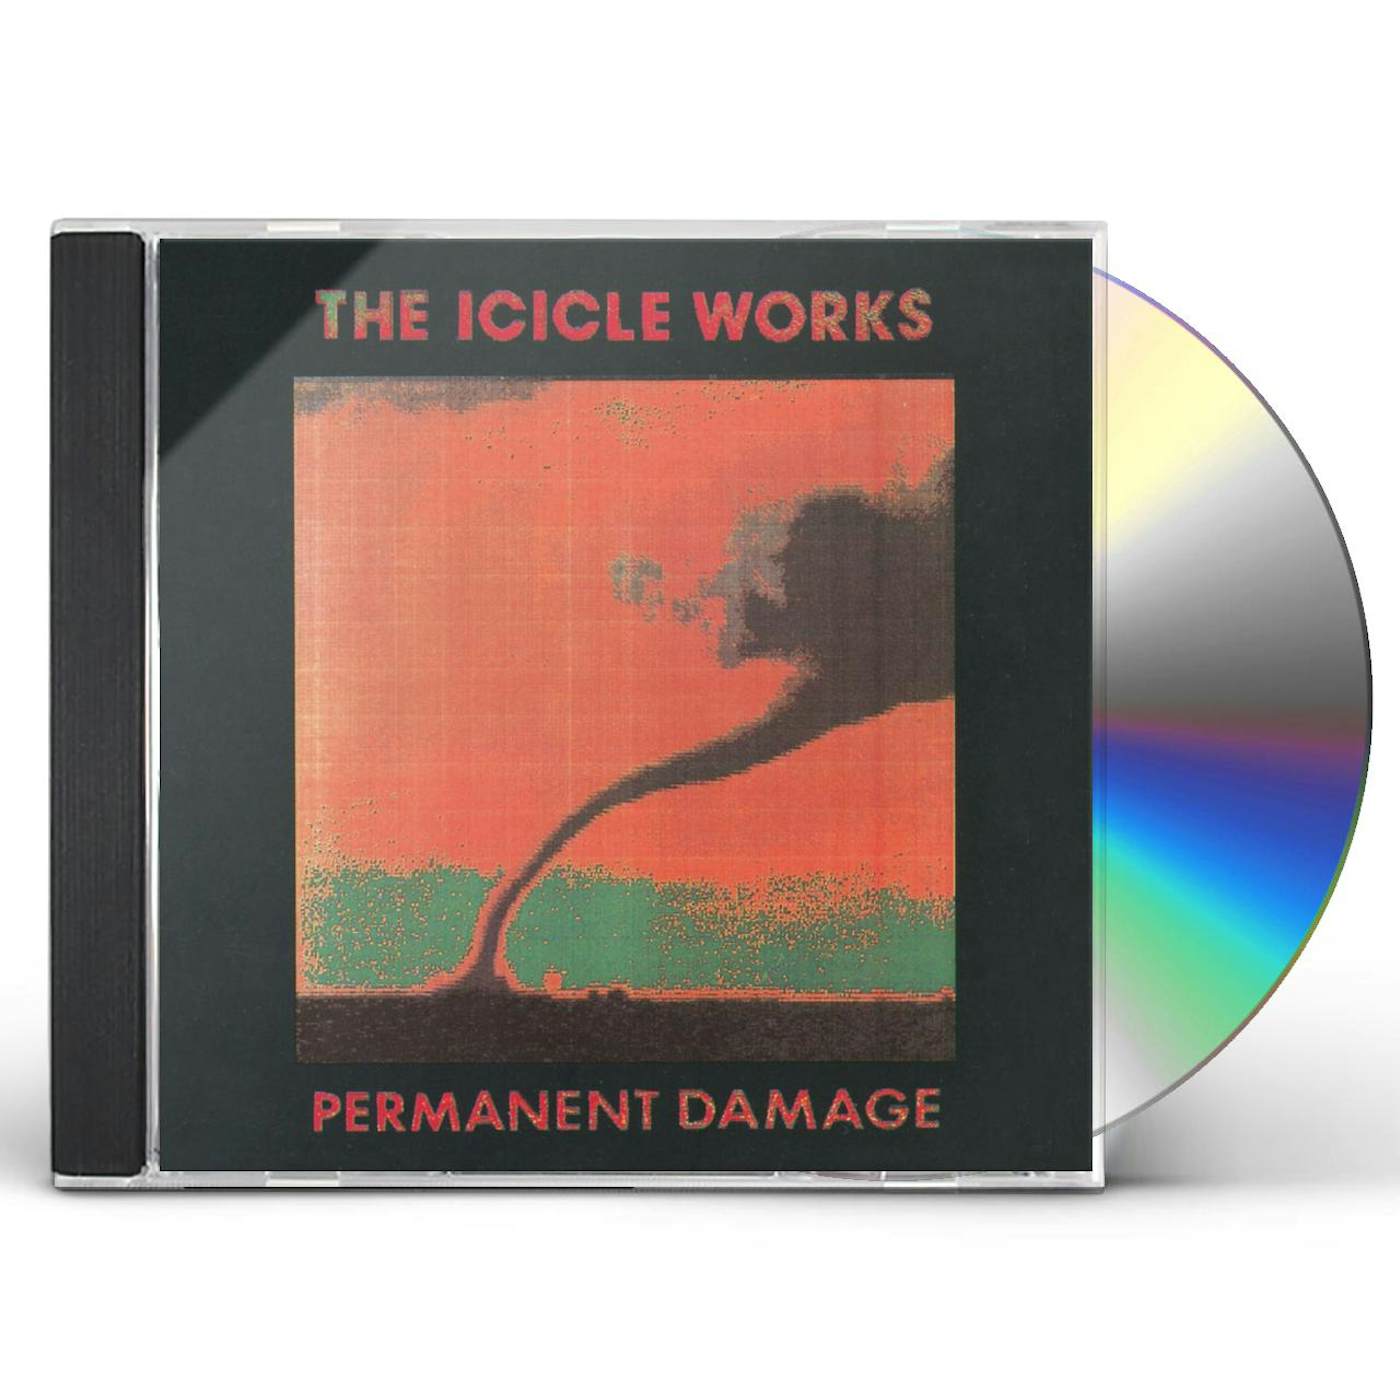 The Icicle Works PERMANENT DAMAGE CD